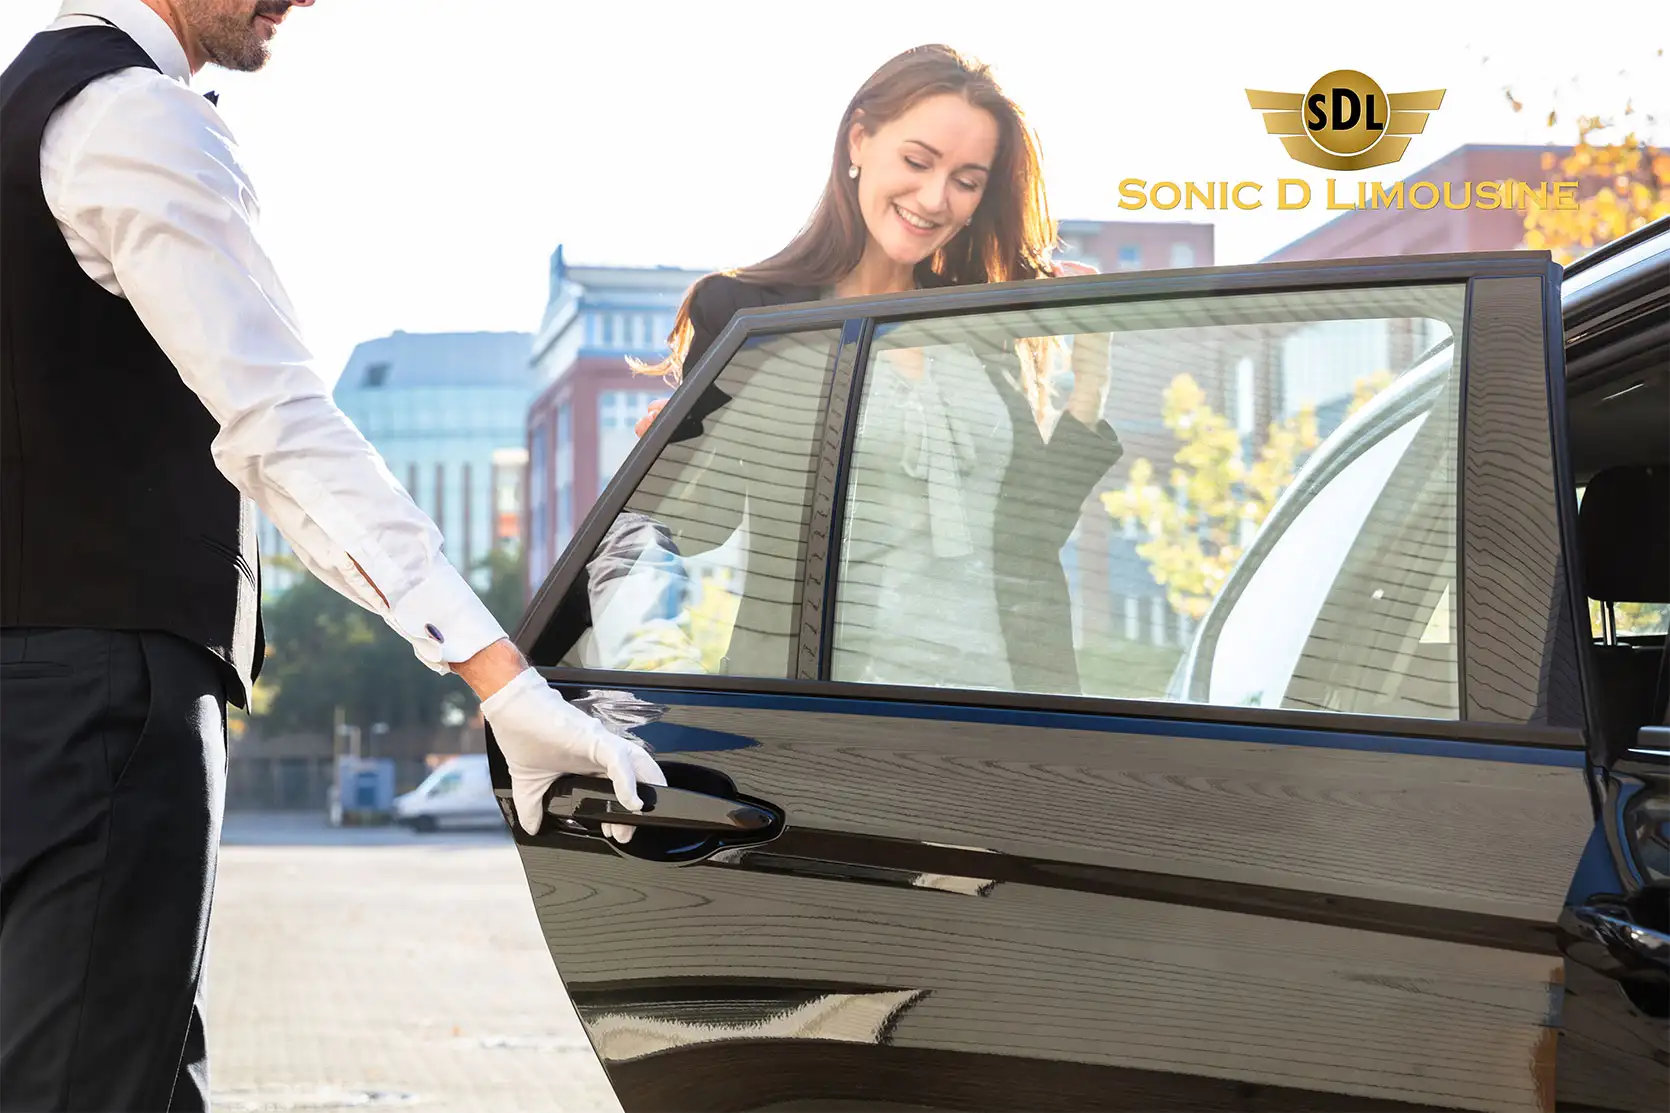 Sonic D Limousine A man and woman getting out of a car.